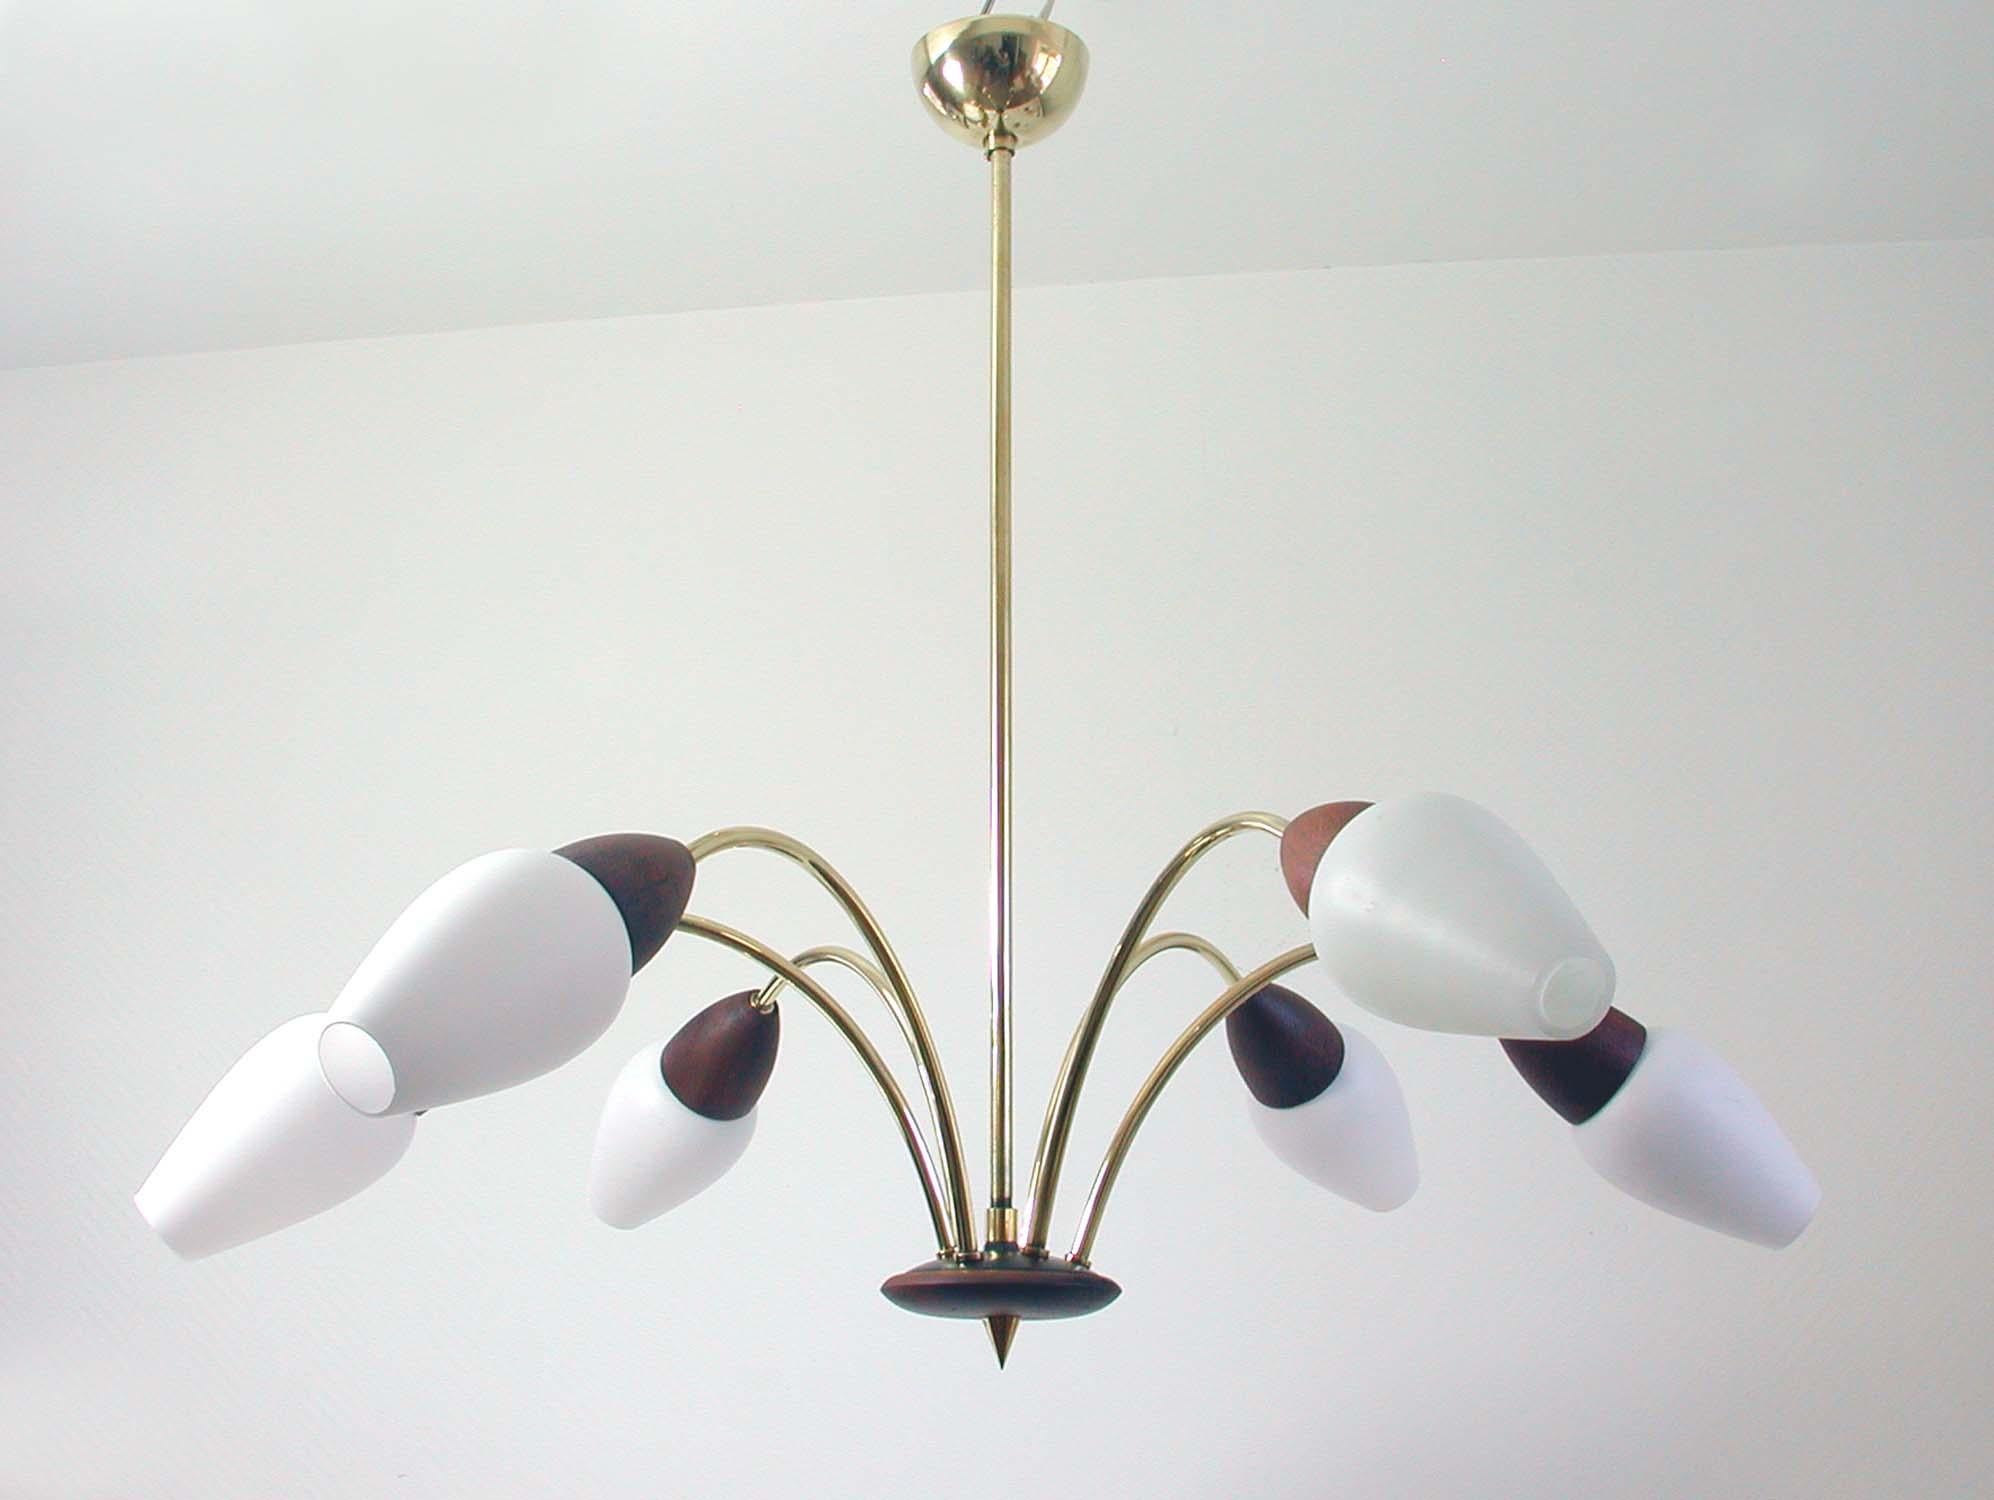 This six-light chandelier was manufactured in Denmark in the late 1950s-early 1960s. It is made of brass and teak and has got six opal glass lampsshades.

Condition is in excellent and the lamp is in full working order, cleaned and all brass